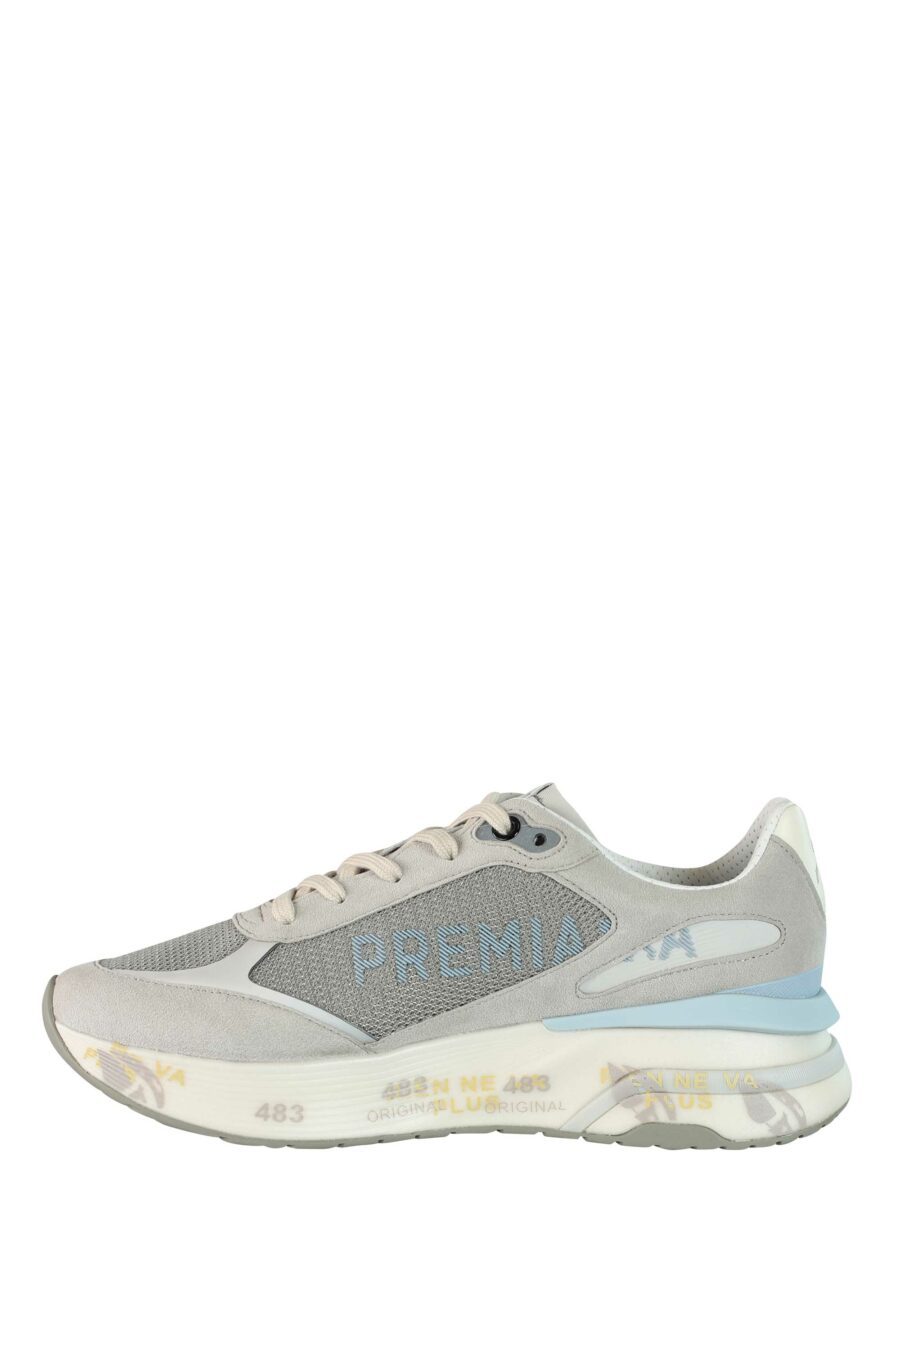 Grey trainers with sky blue "moe run 6333" - 8058326252810 3